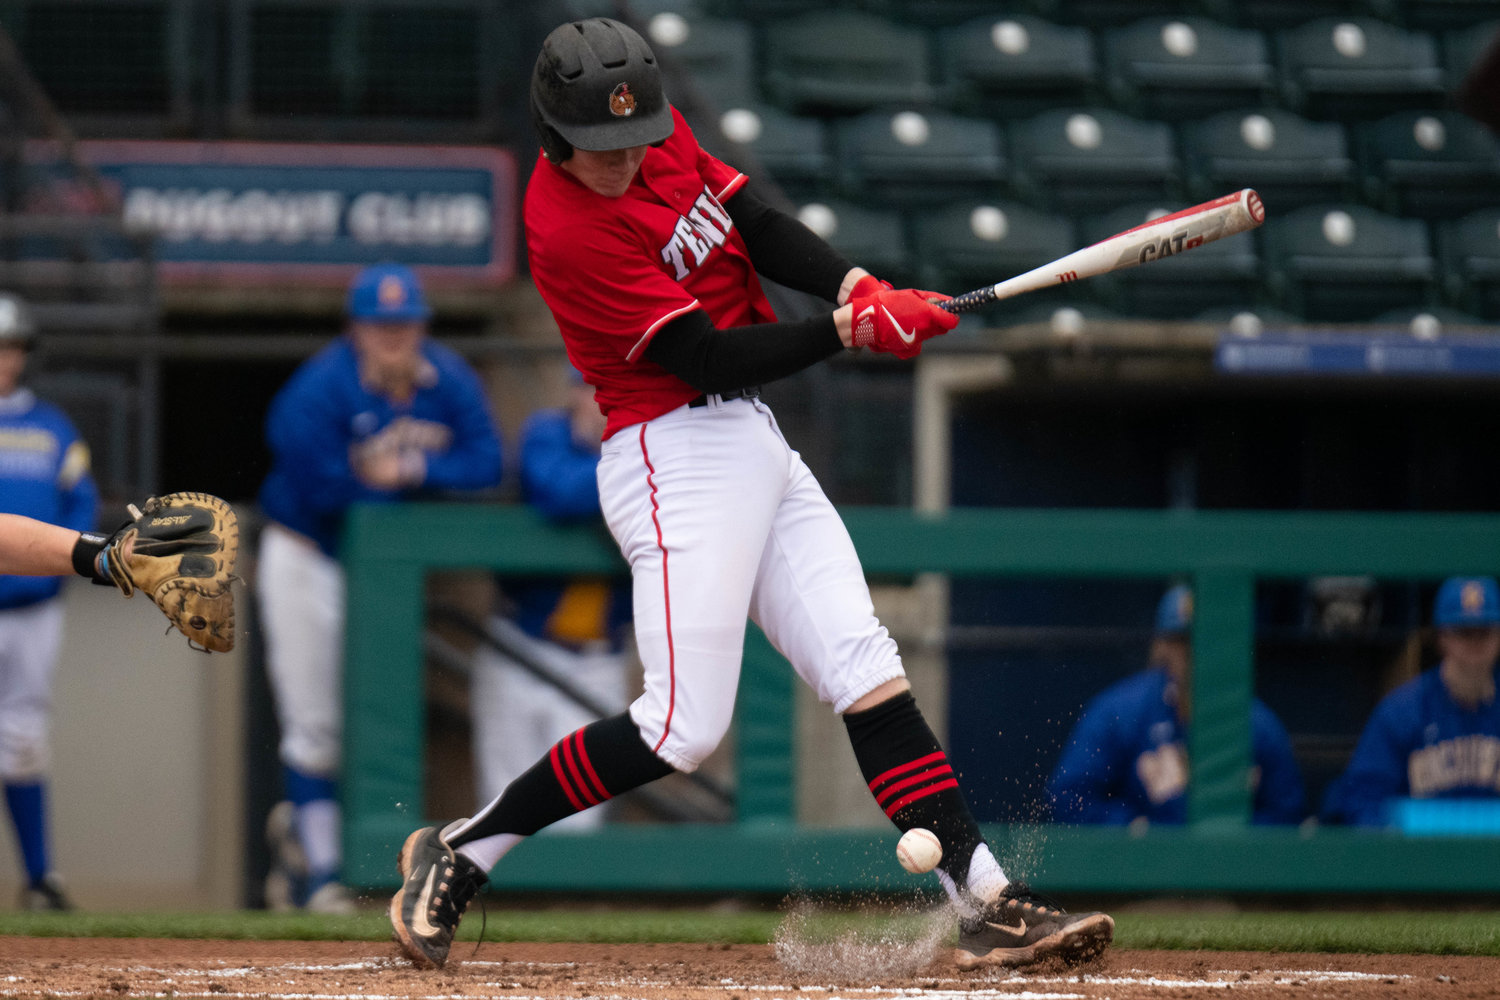 Austin Gonia chops an infield single in the first inning of Tenino's 11-7 loss to Rochester on April 1 at Cheney Stadium.